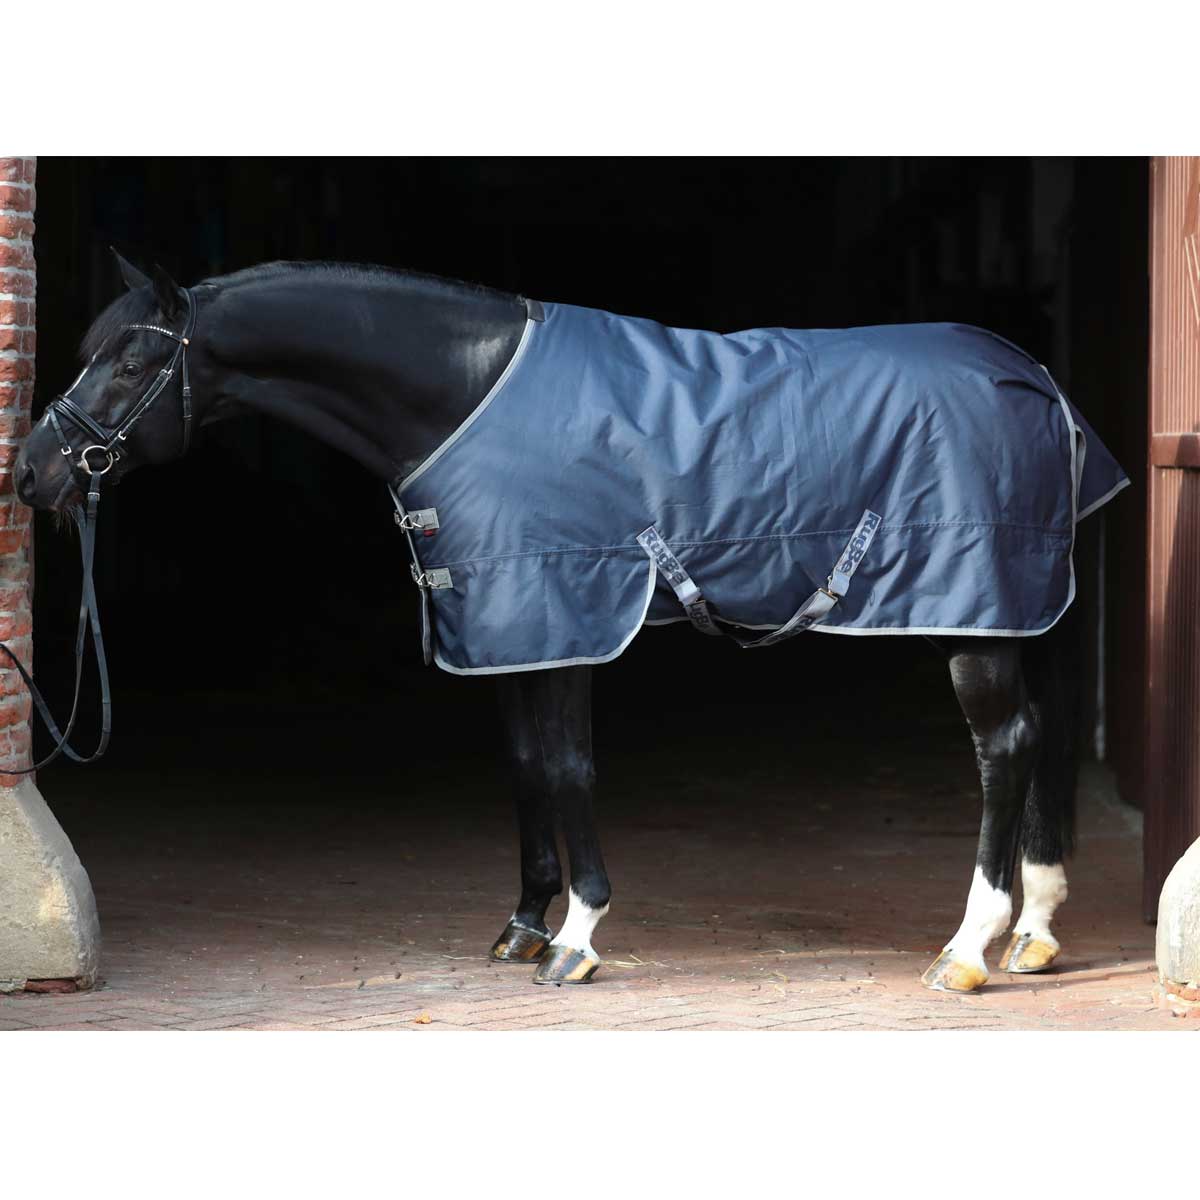 Covalliero Coperta invernale RugBe IceProtect navy 600D, 300g 125